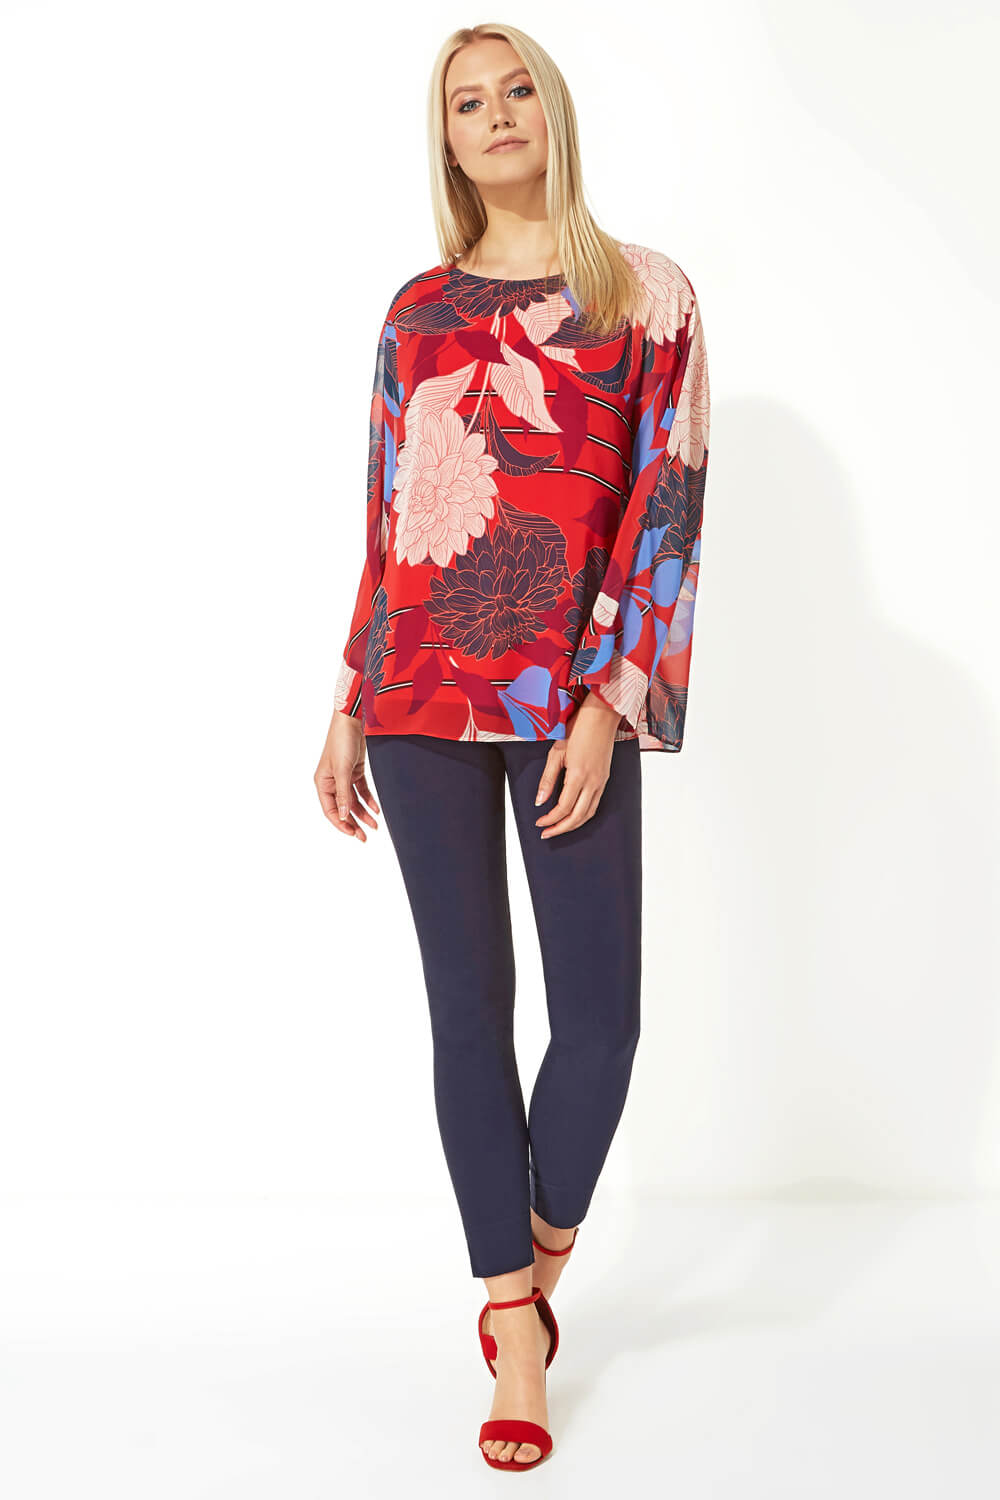 Red Floral Overlay Chiffon Top, Image 2 of 5